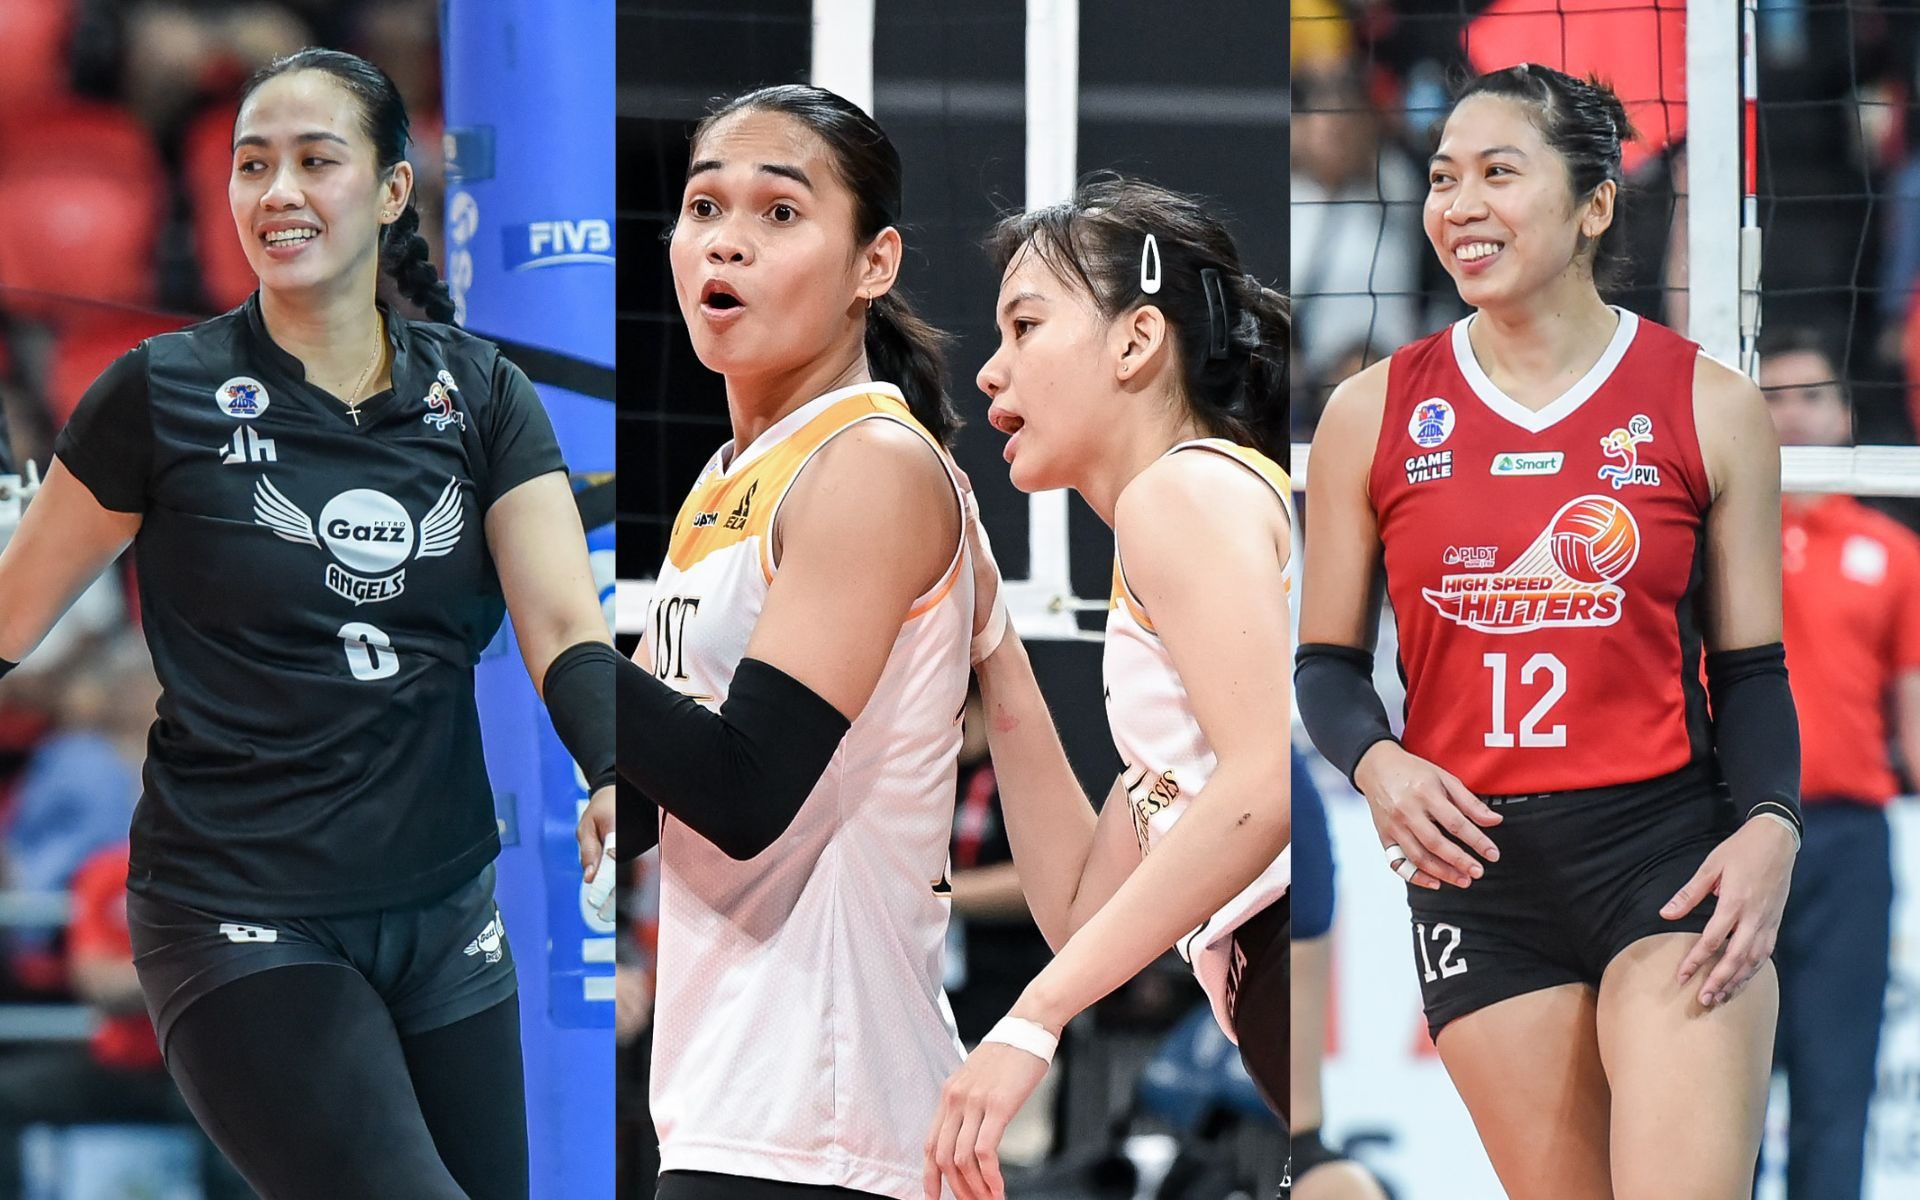 Destined for greatness? UST draws inspiration from team icons amid 13-year best start